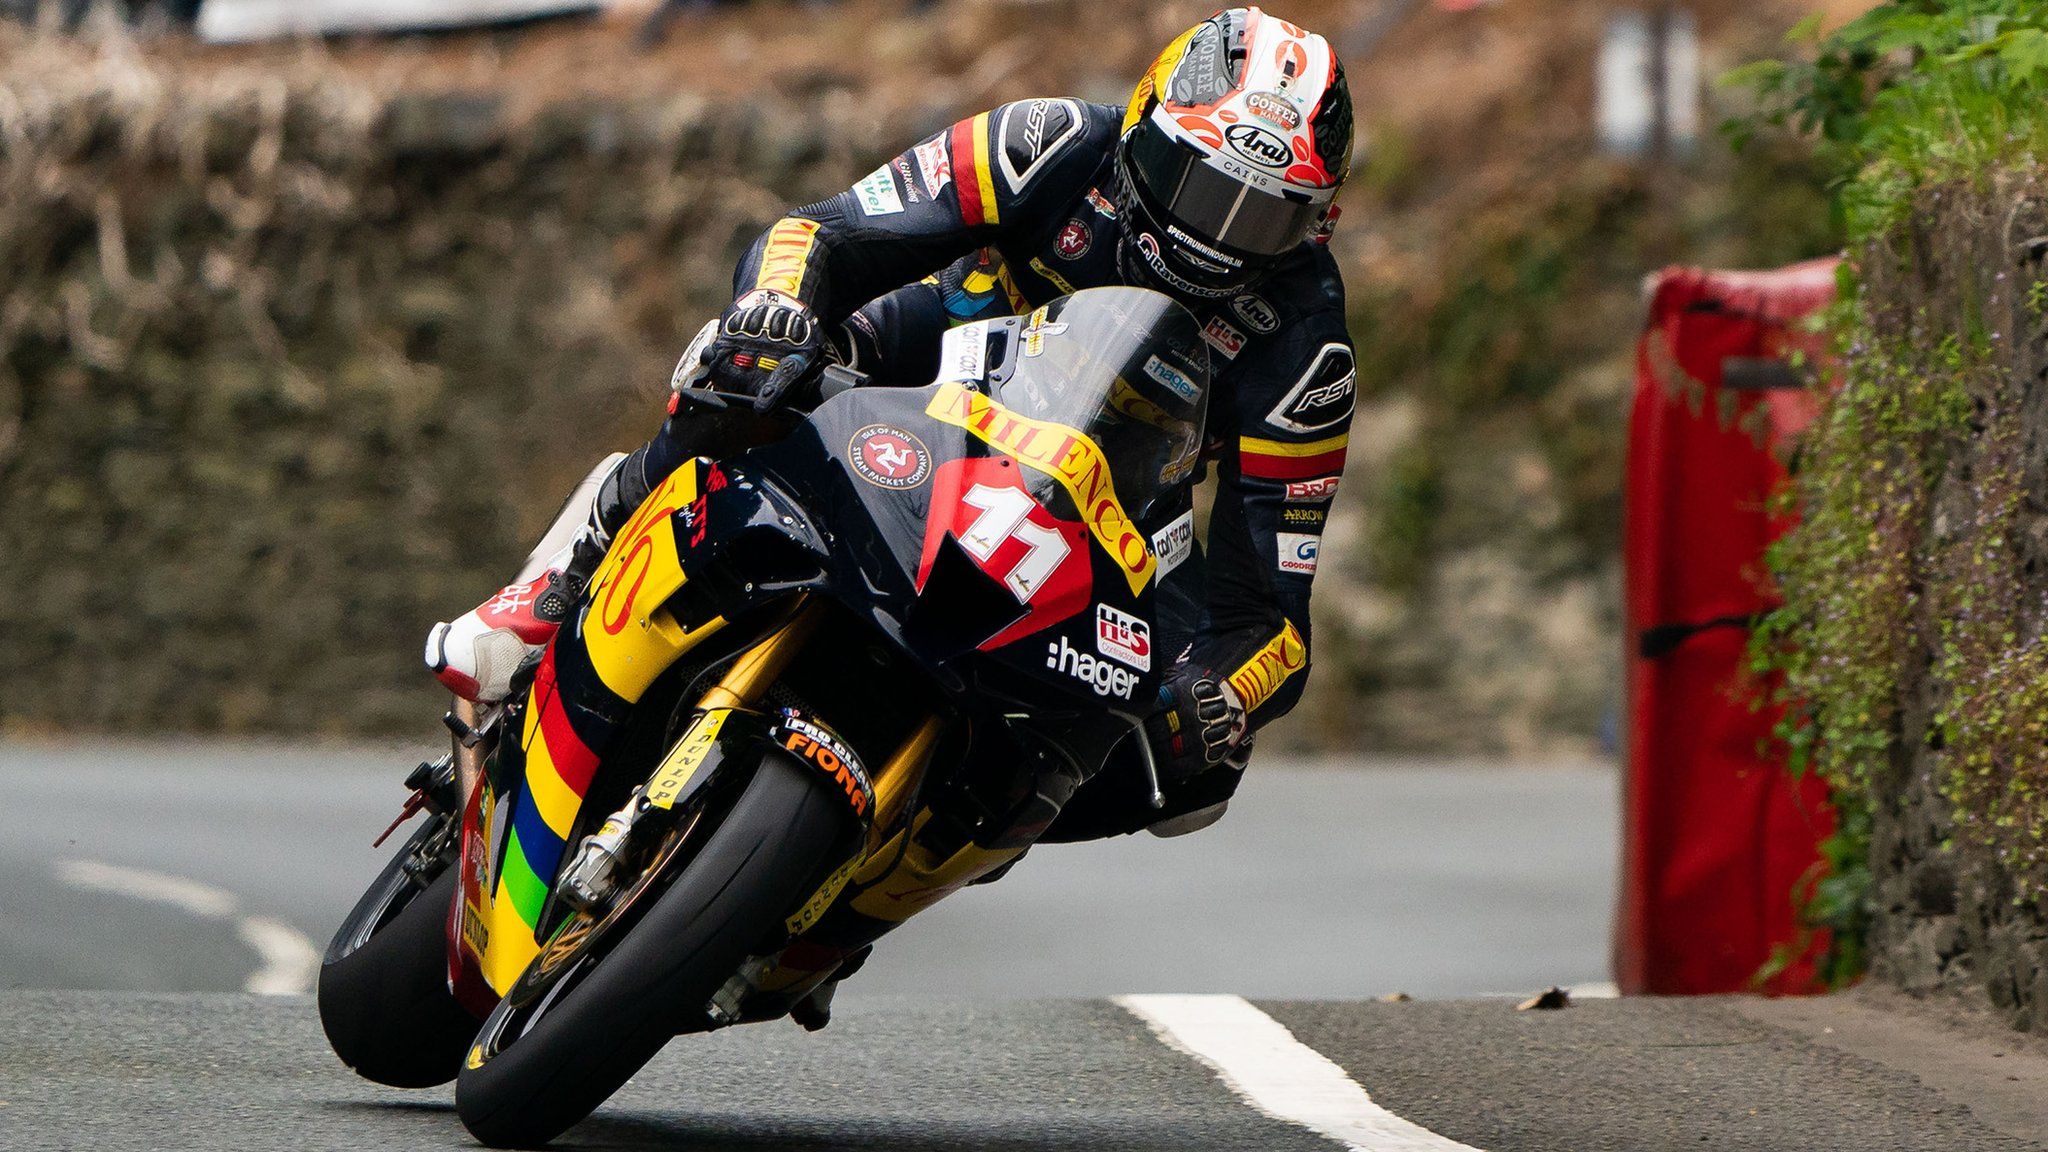 Conor Cummins on the Superstock bike